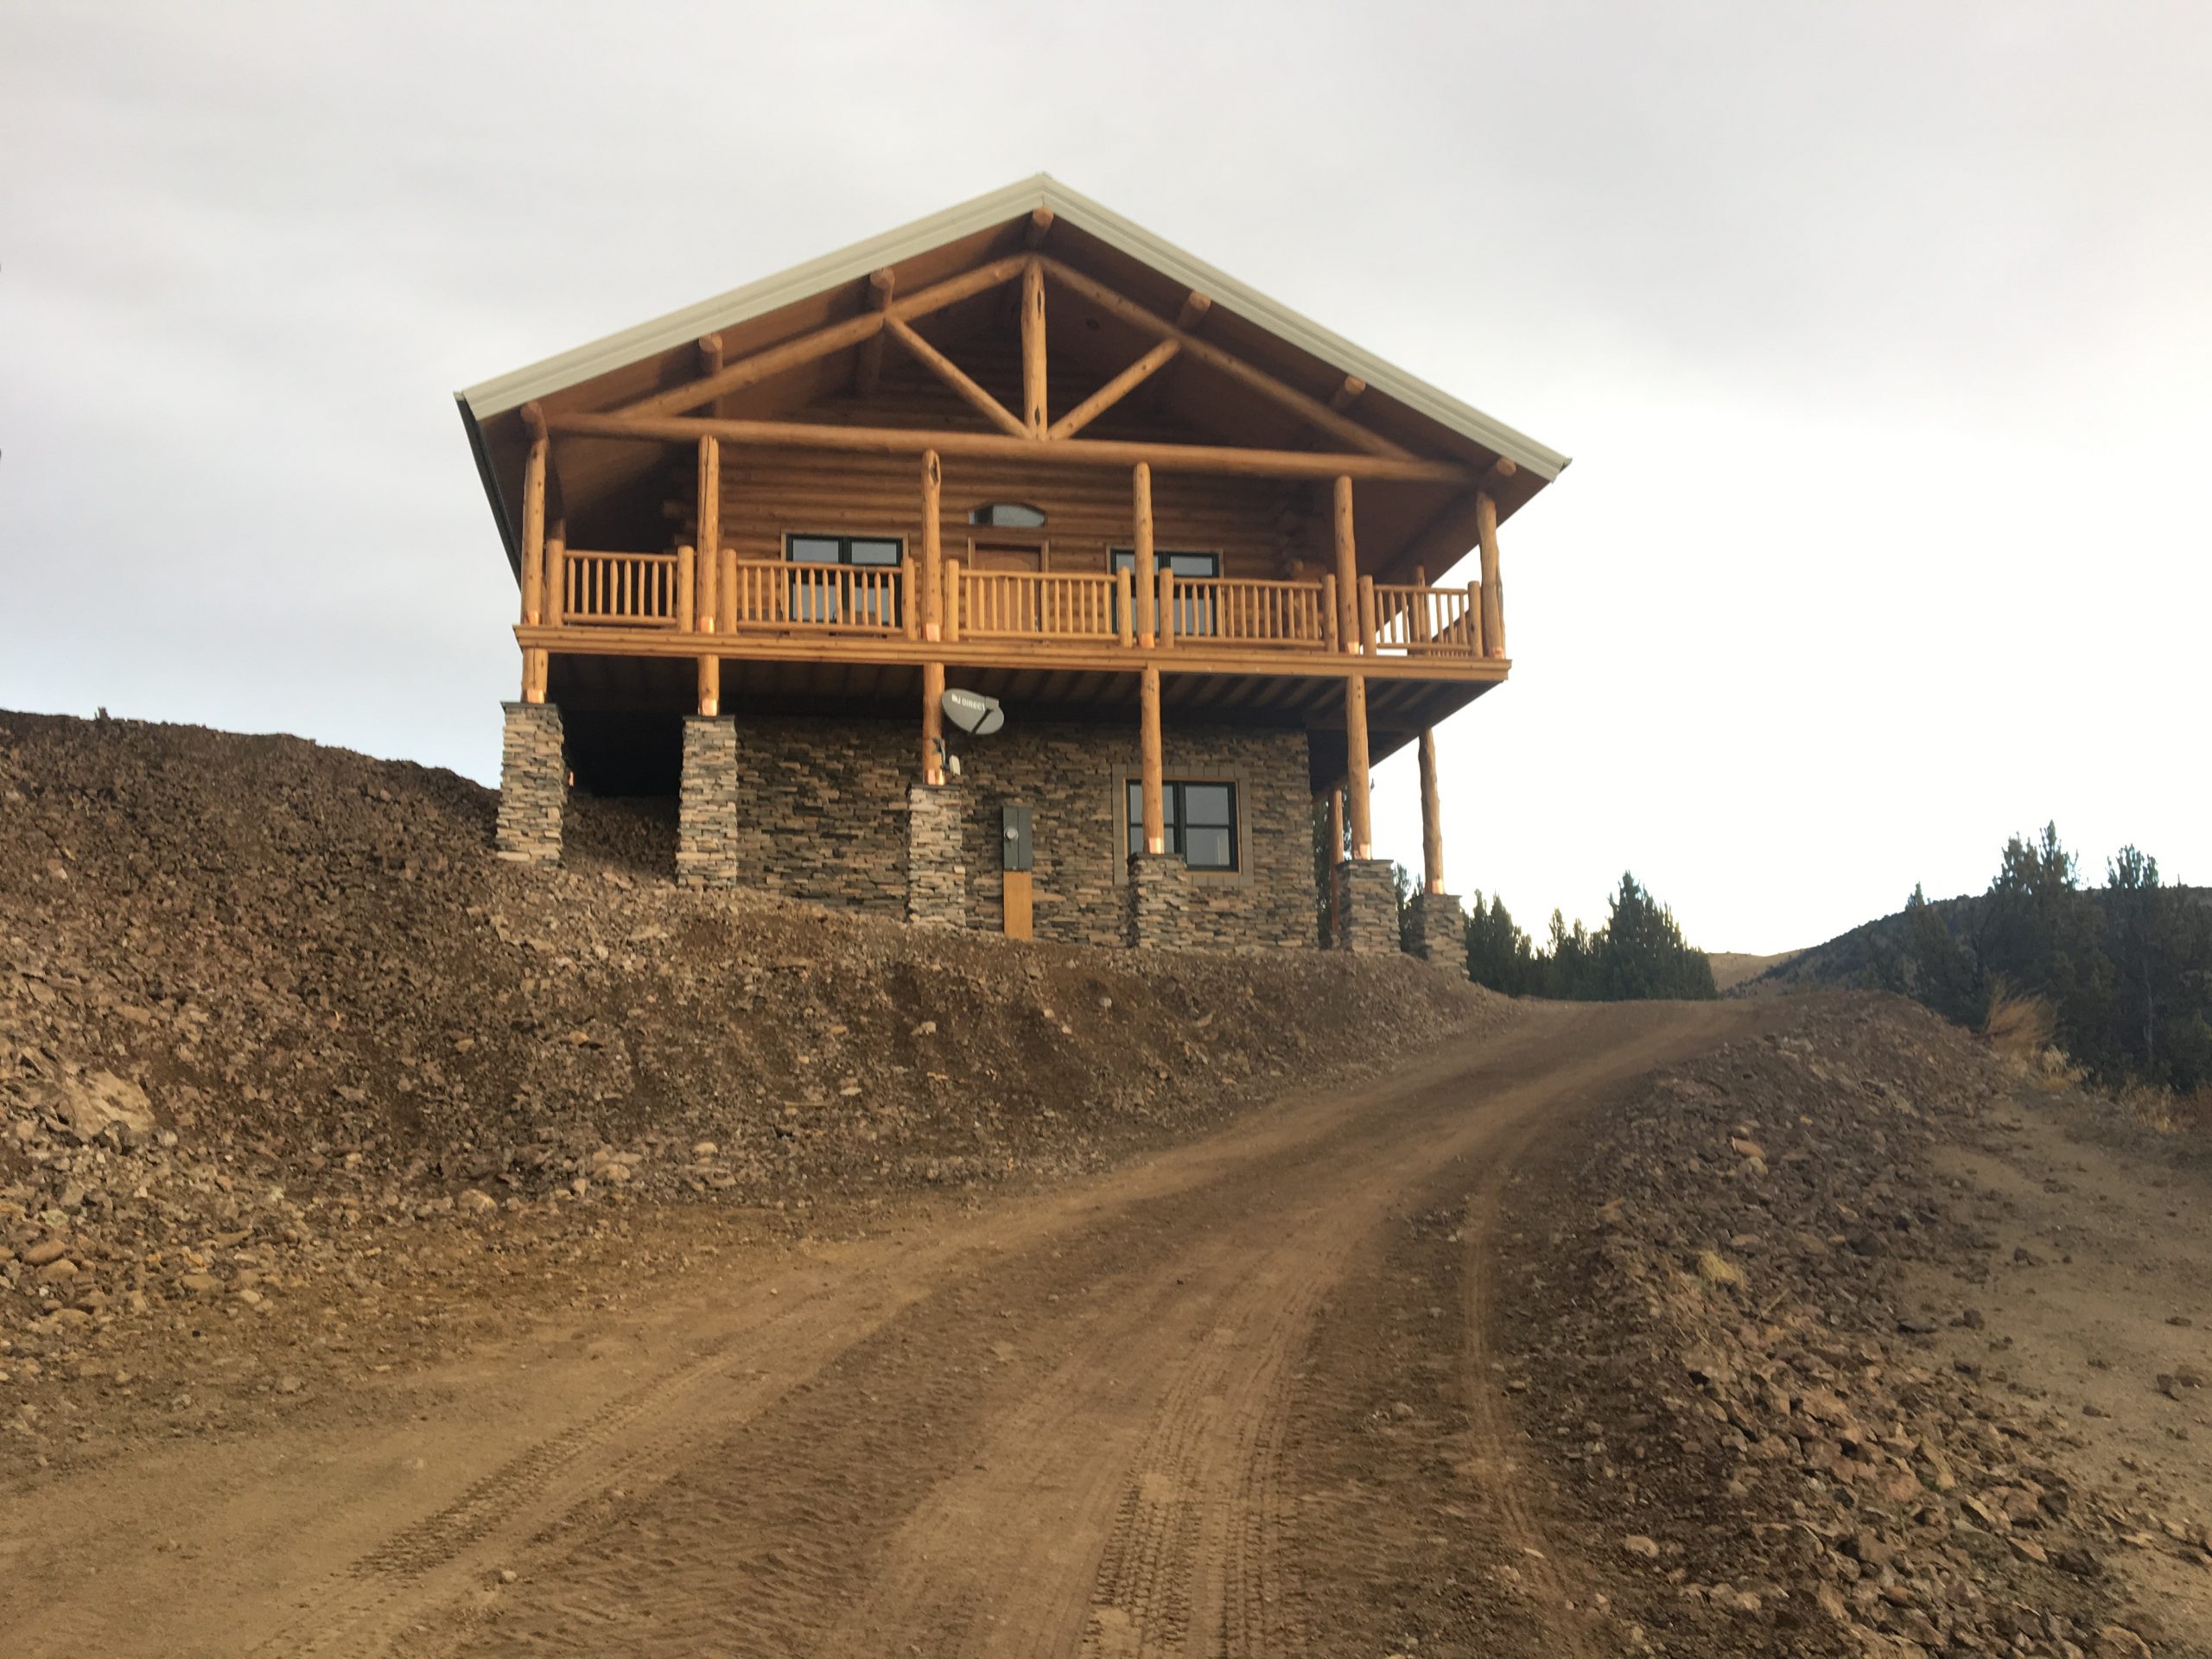 The walk out basement of this handcrafted log home is finished with stone to accent the logs.